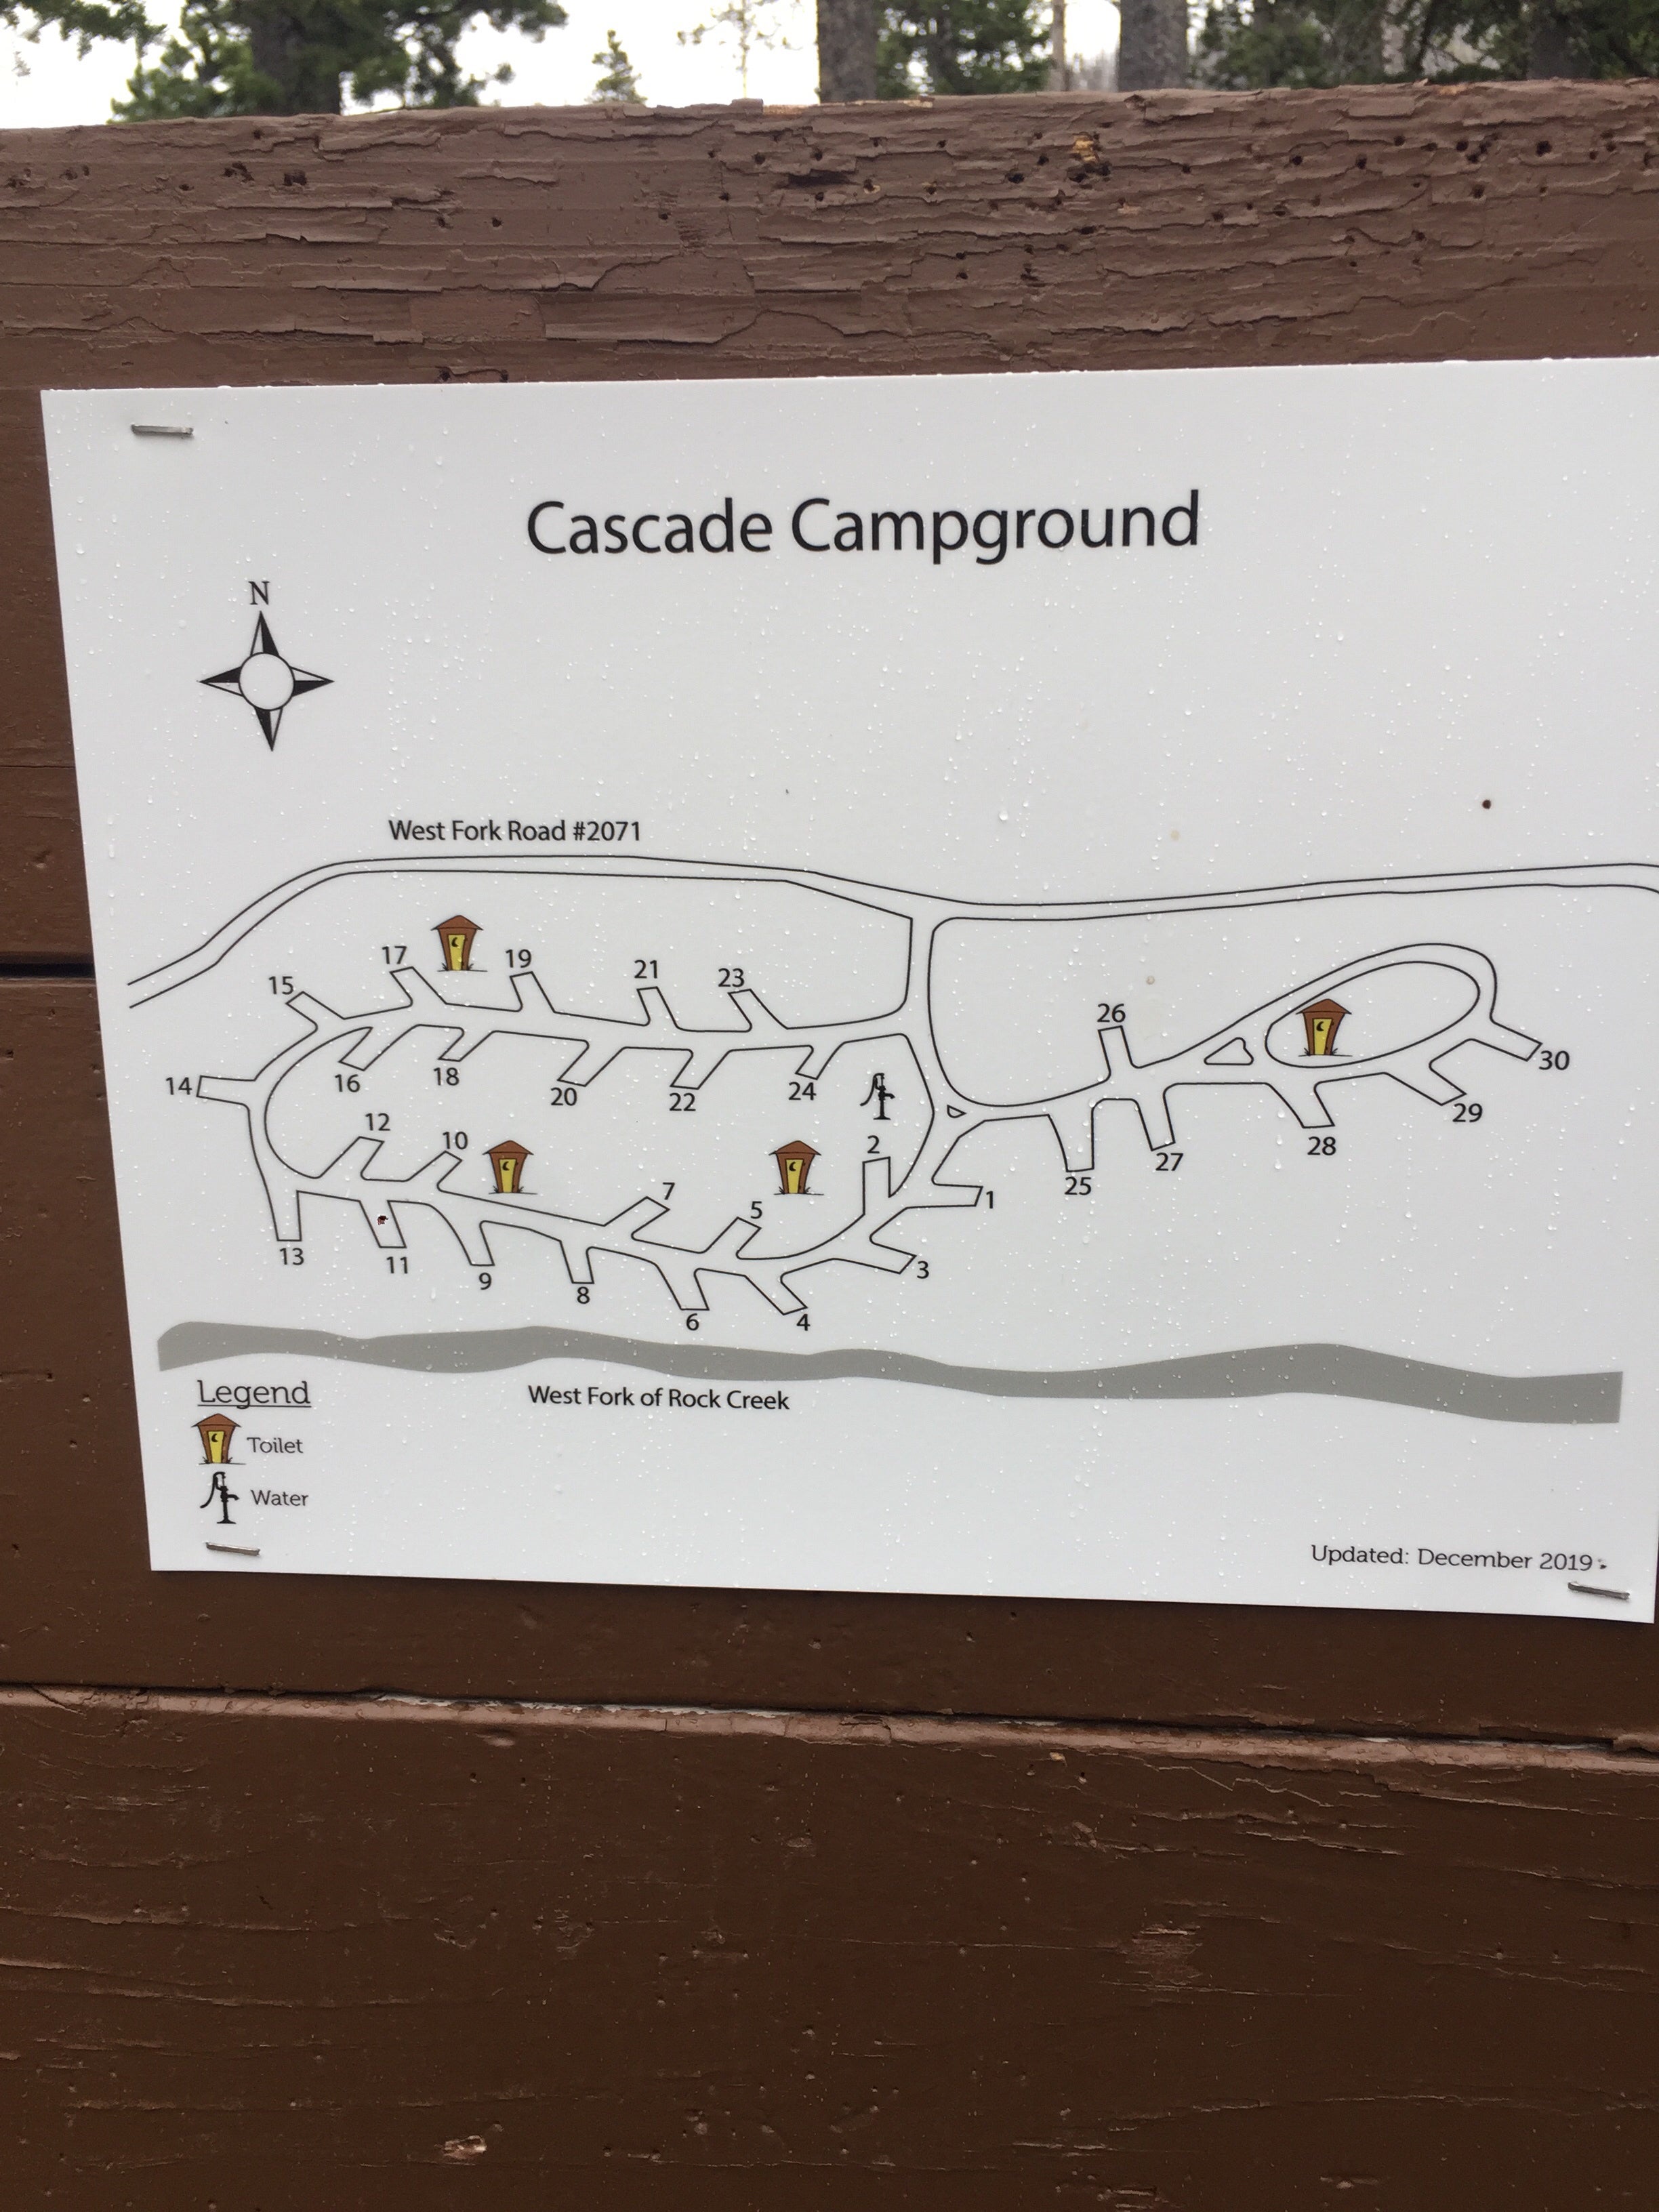 Camper submitted image from Cascade Campground-Custer National Forest - 5